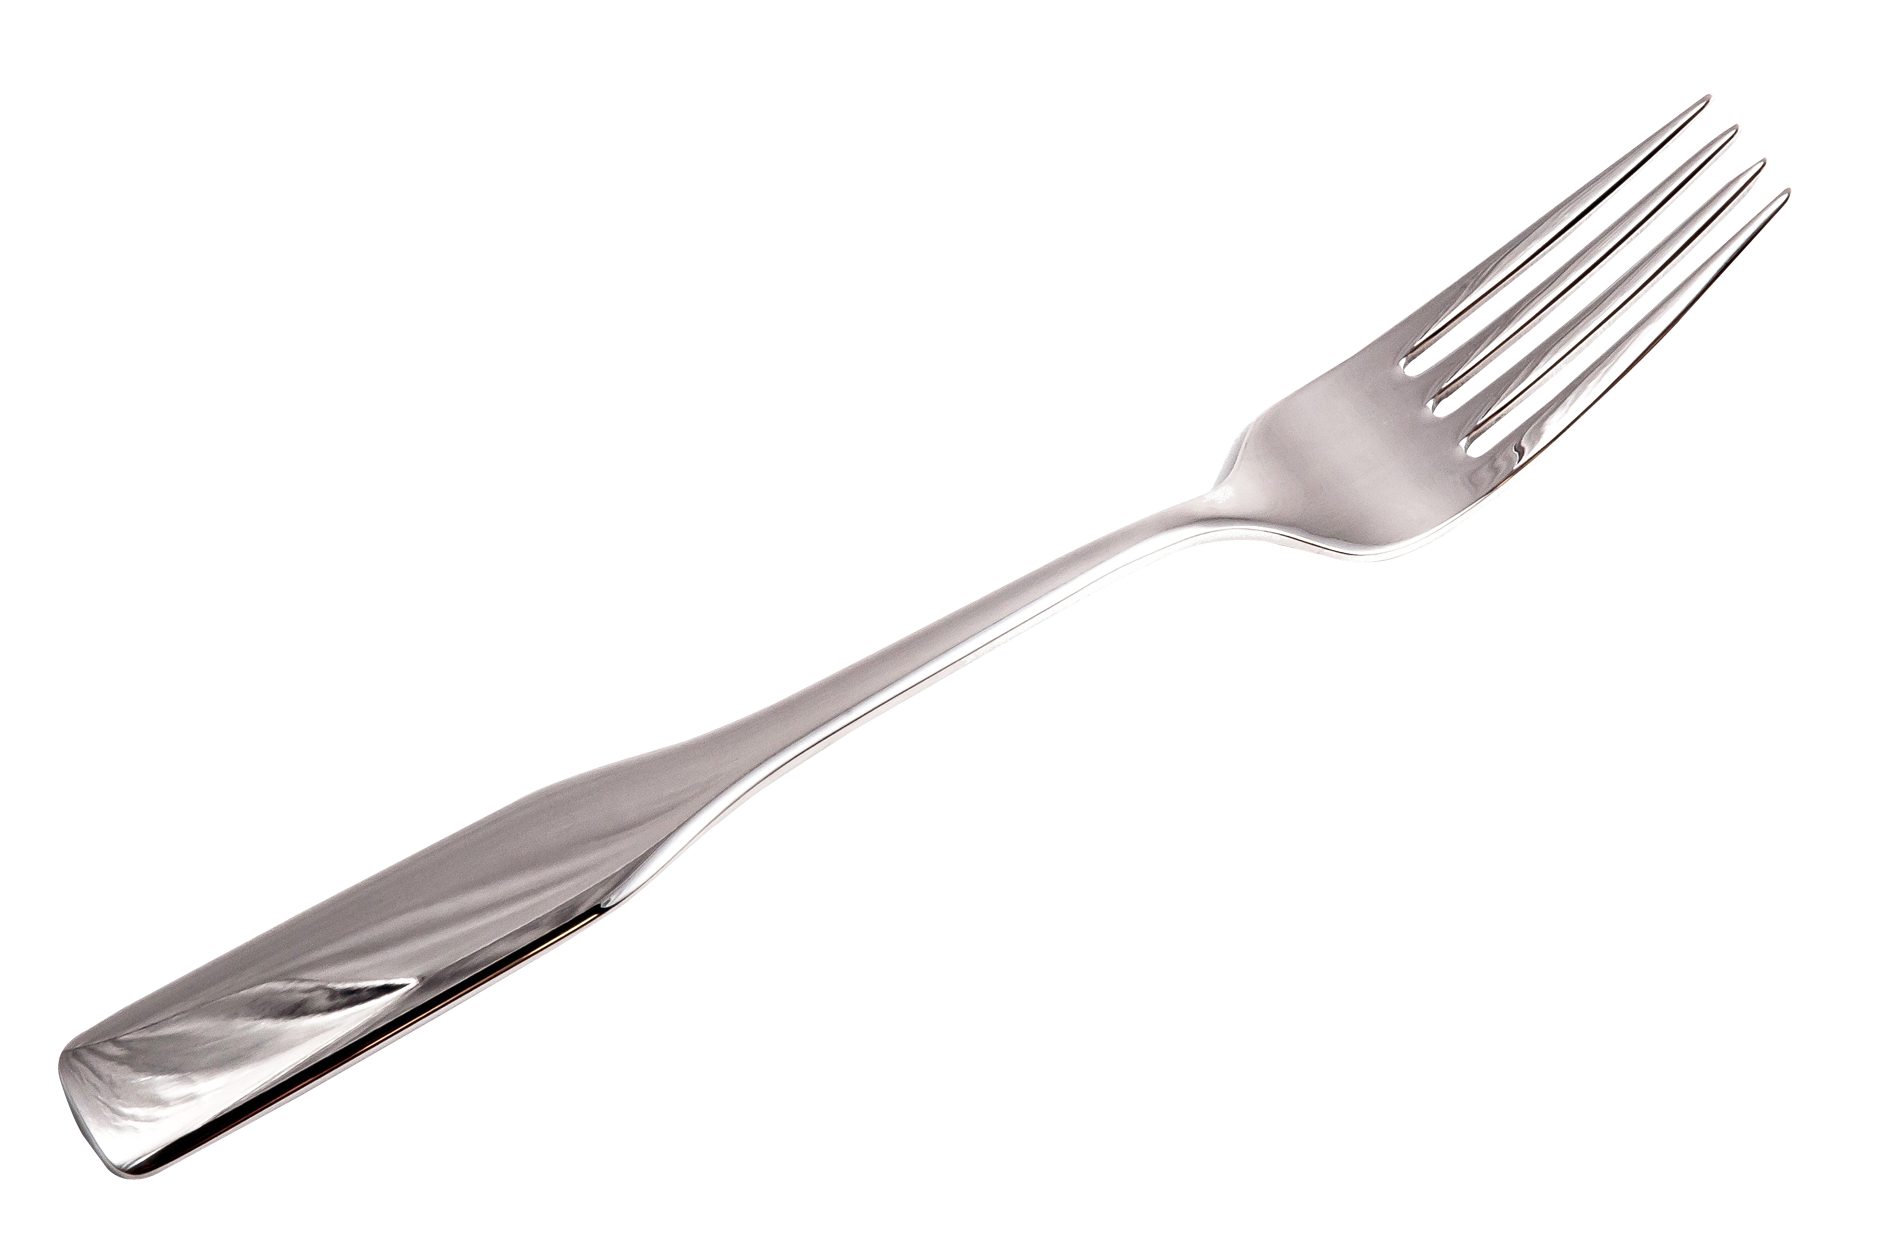 Fork Spoon Bitcoin Segwit2X Free Transparent Image HD Clipart